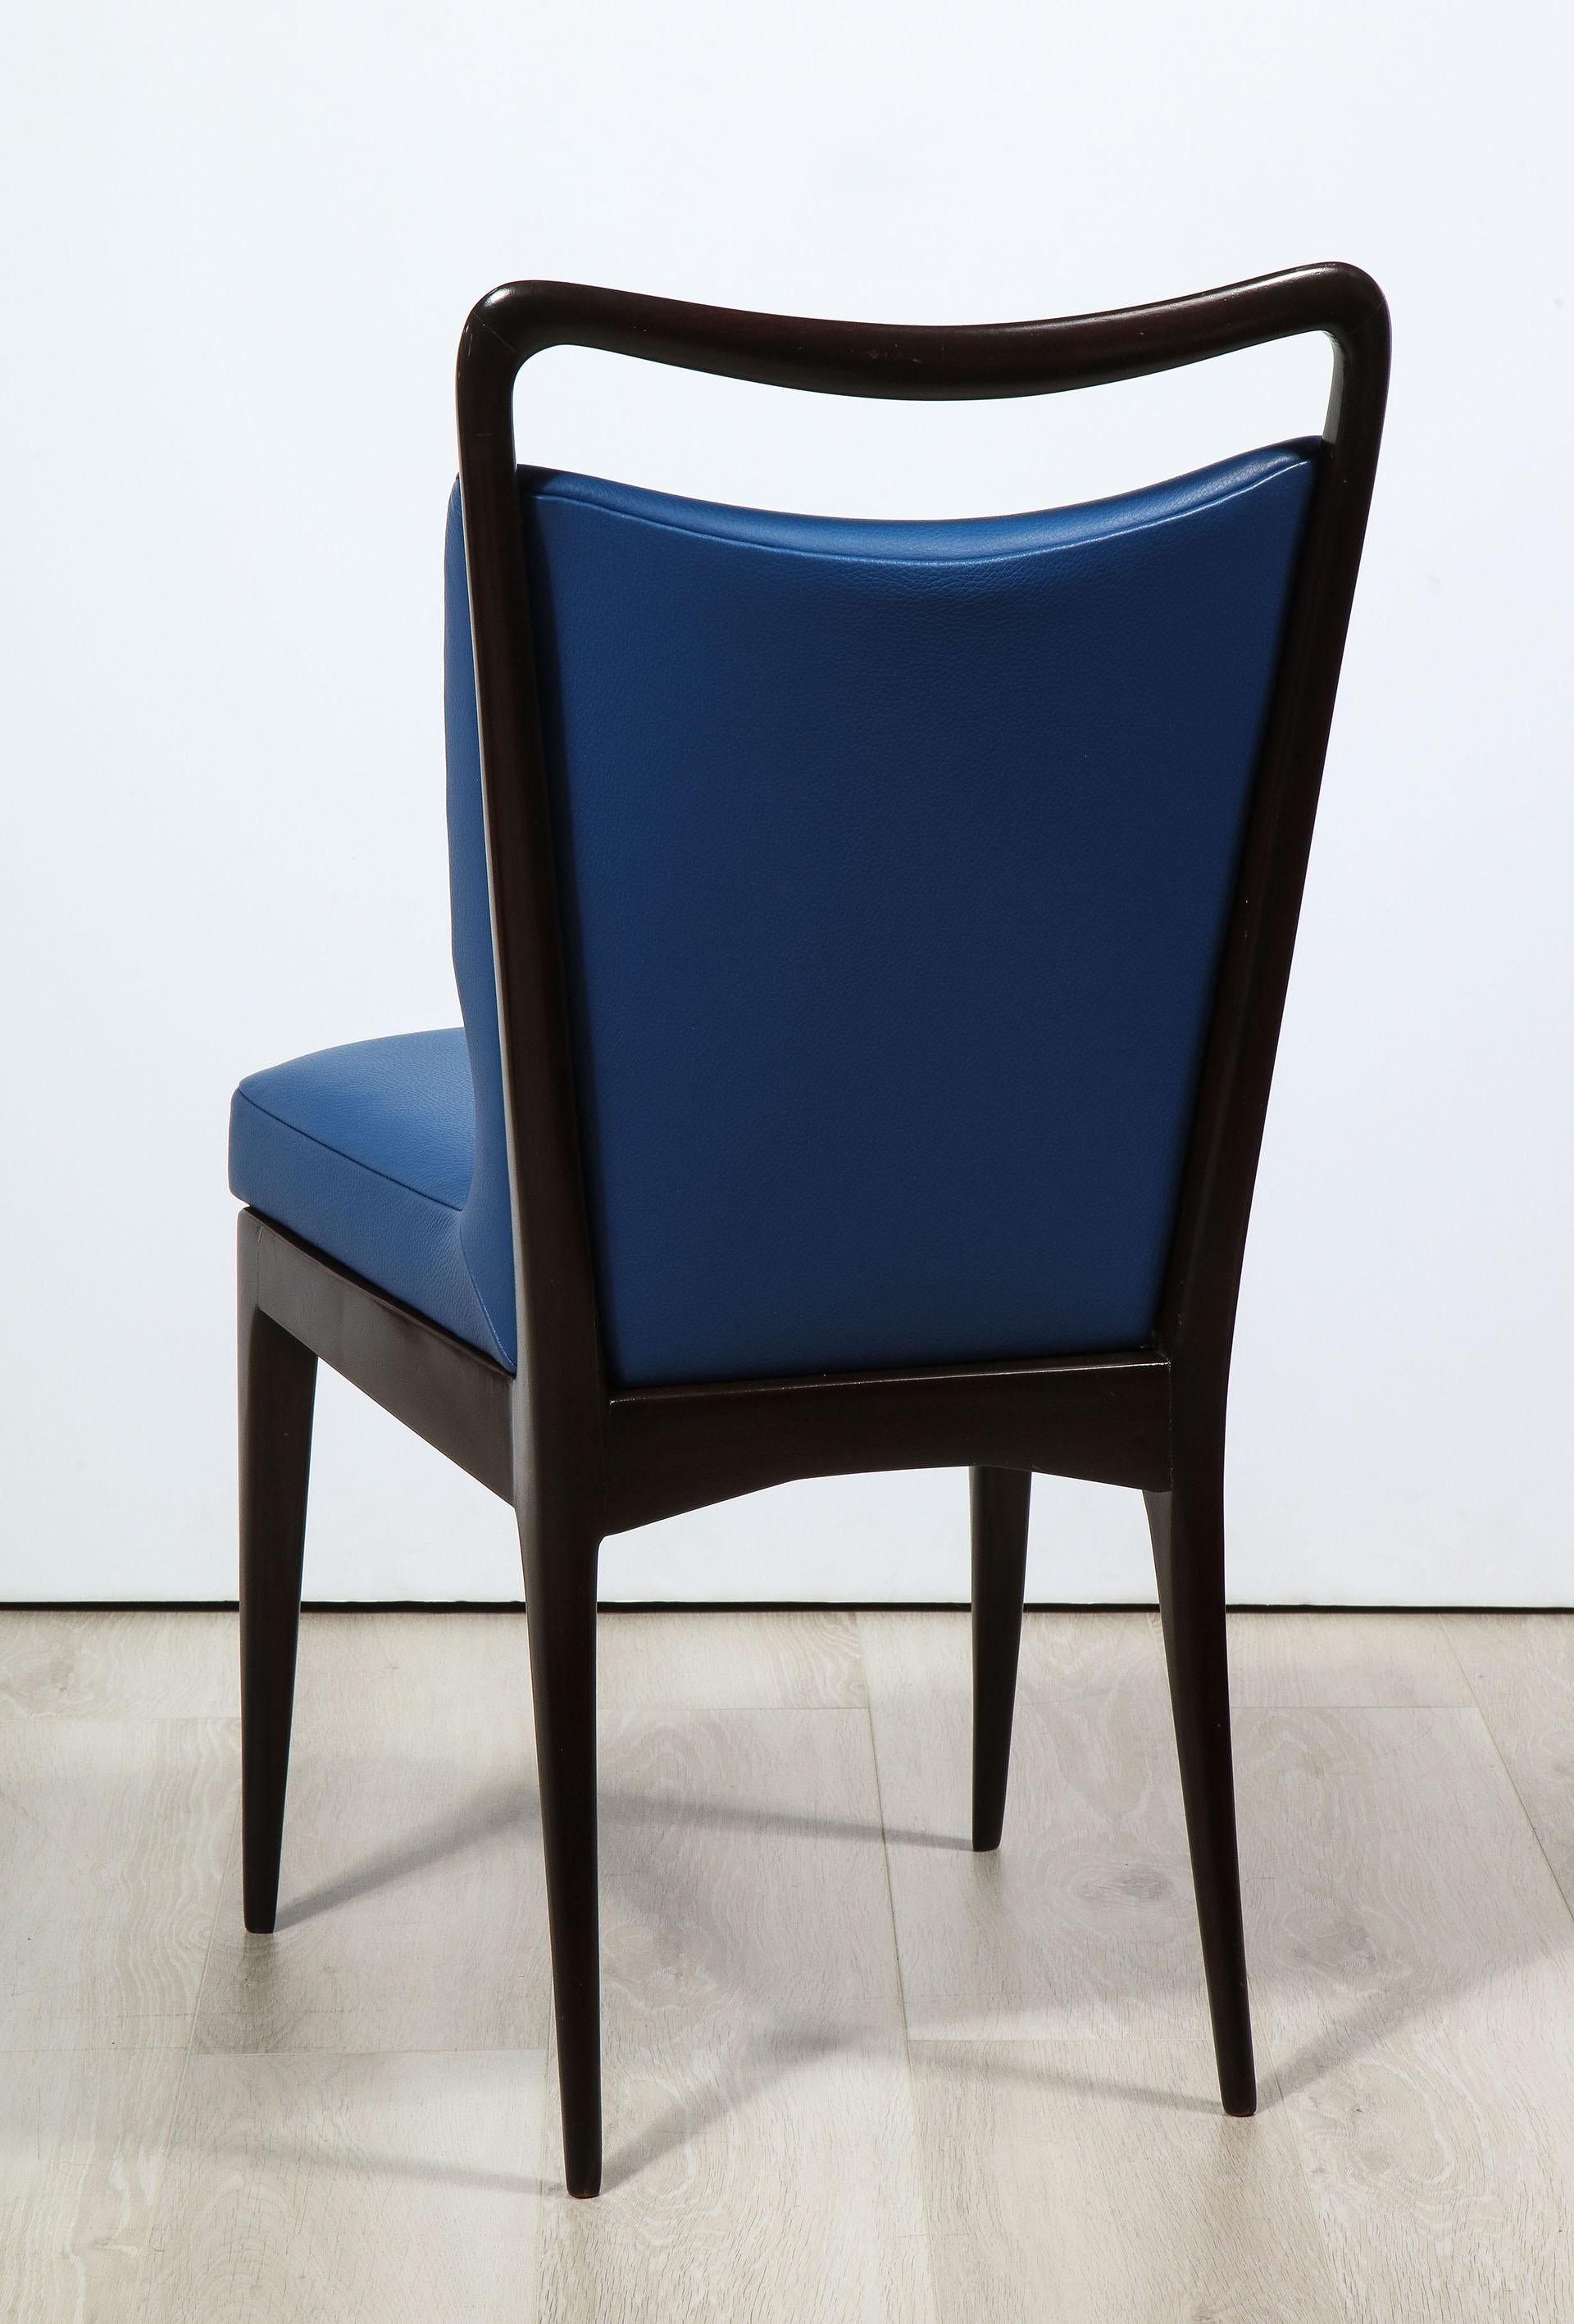 20th Century Rare Set of Four Side Chairs by Arredamenti ISA